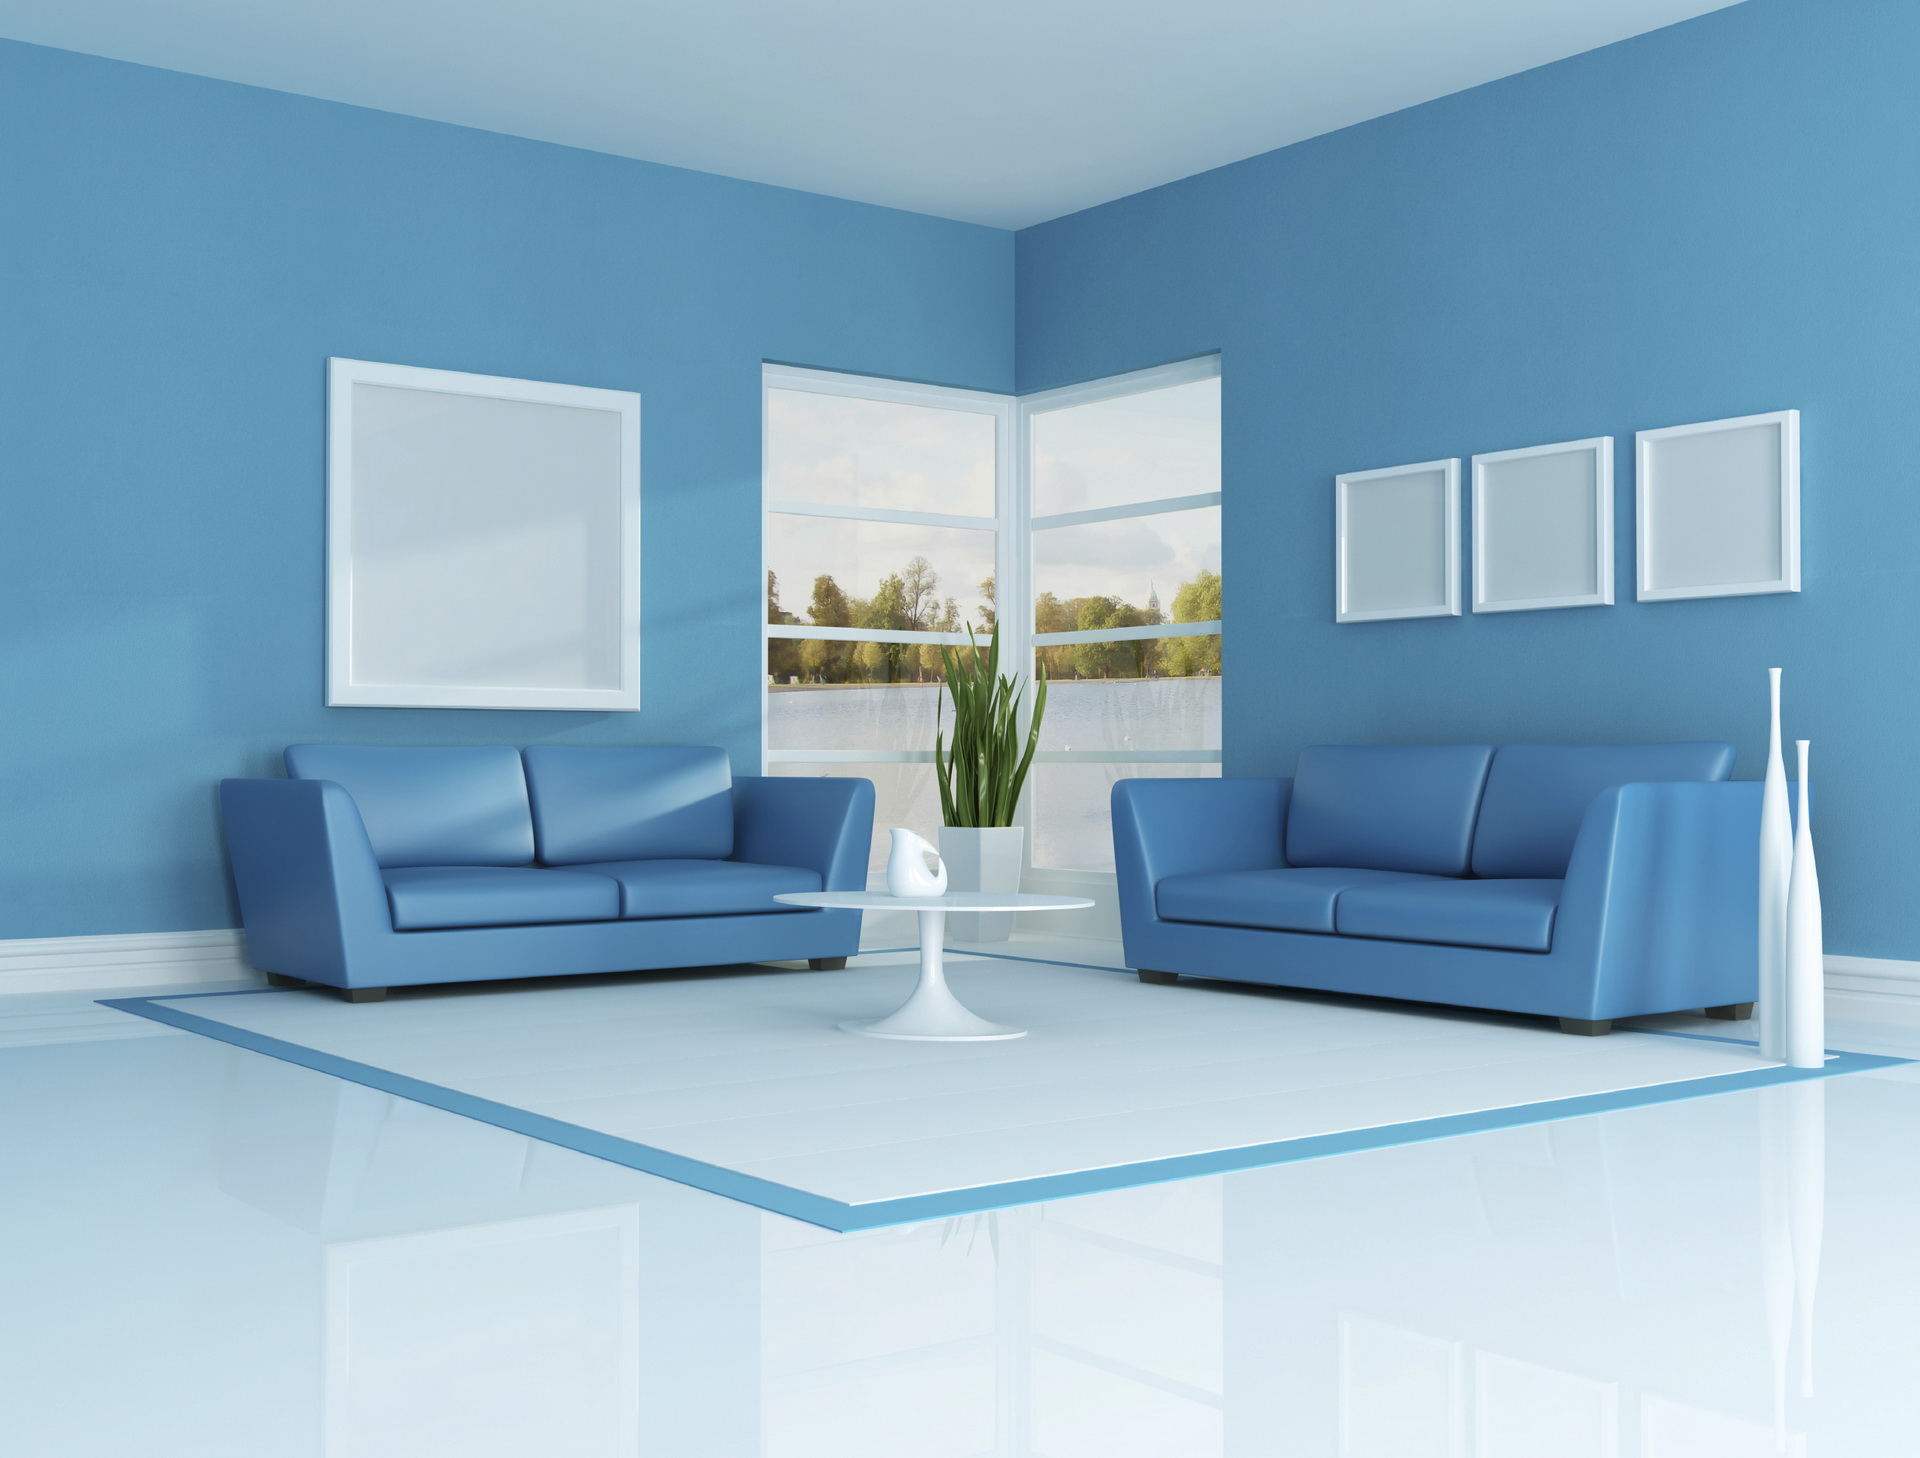 Asian paints colour shades blue - 21 tips for wall painting | Home